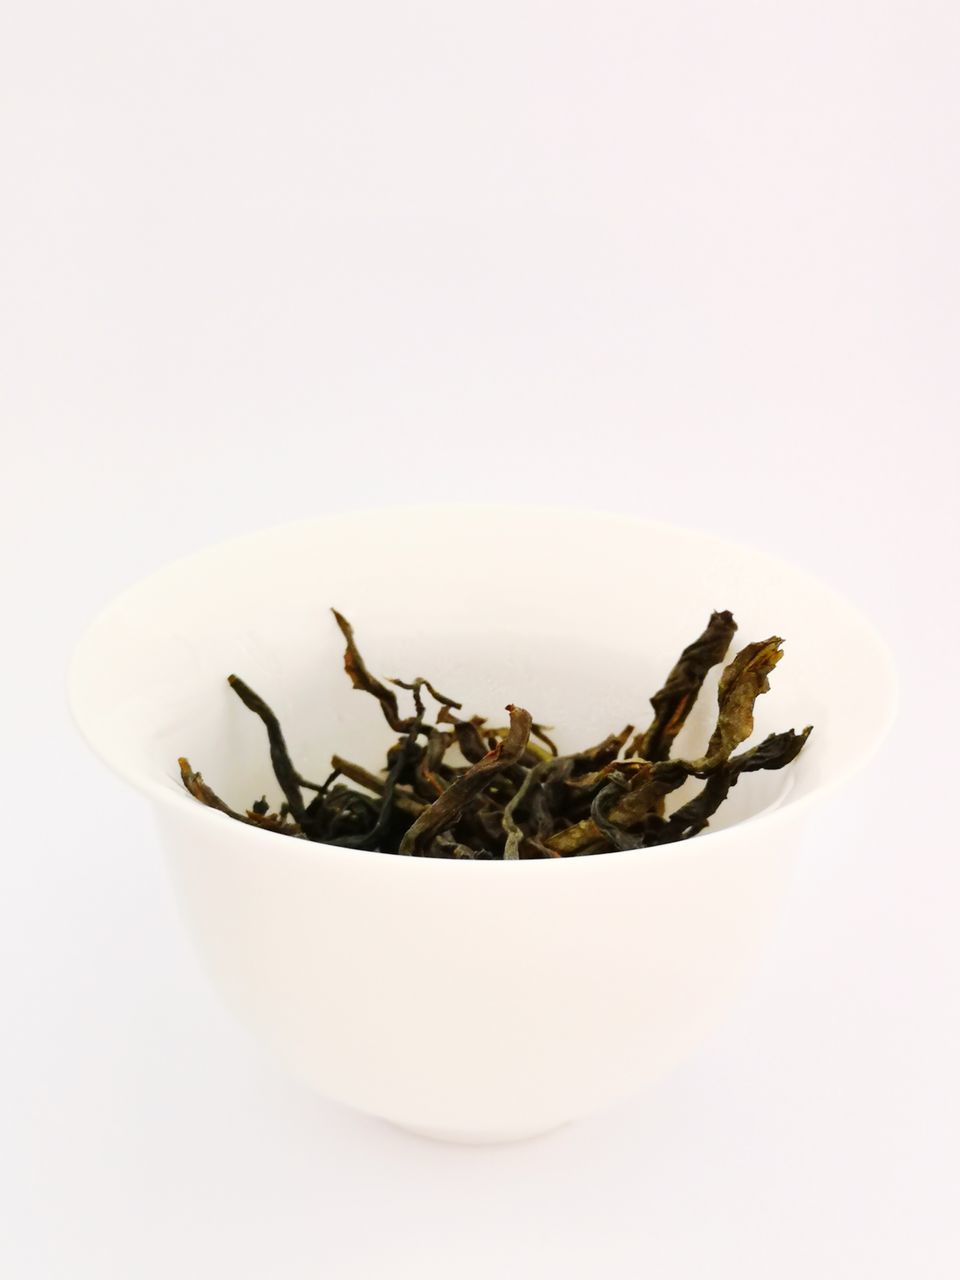 white background, studio shot, copy space, indoors, food and drink, food, still life, no people, close-up, wellbeing, healthy eating, freshness, white color, cut out, bowl, herb, ingredient, tea, cup, spice, tea leaves